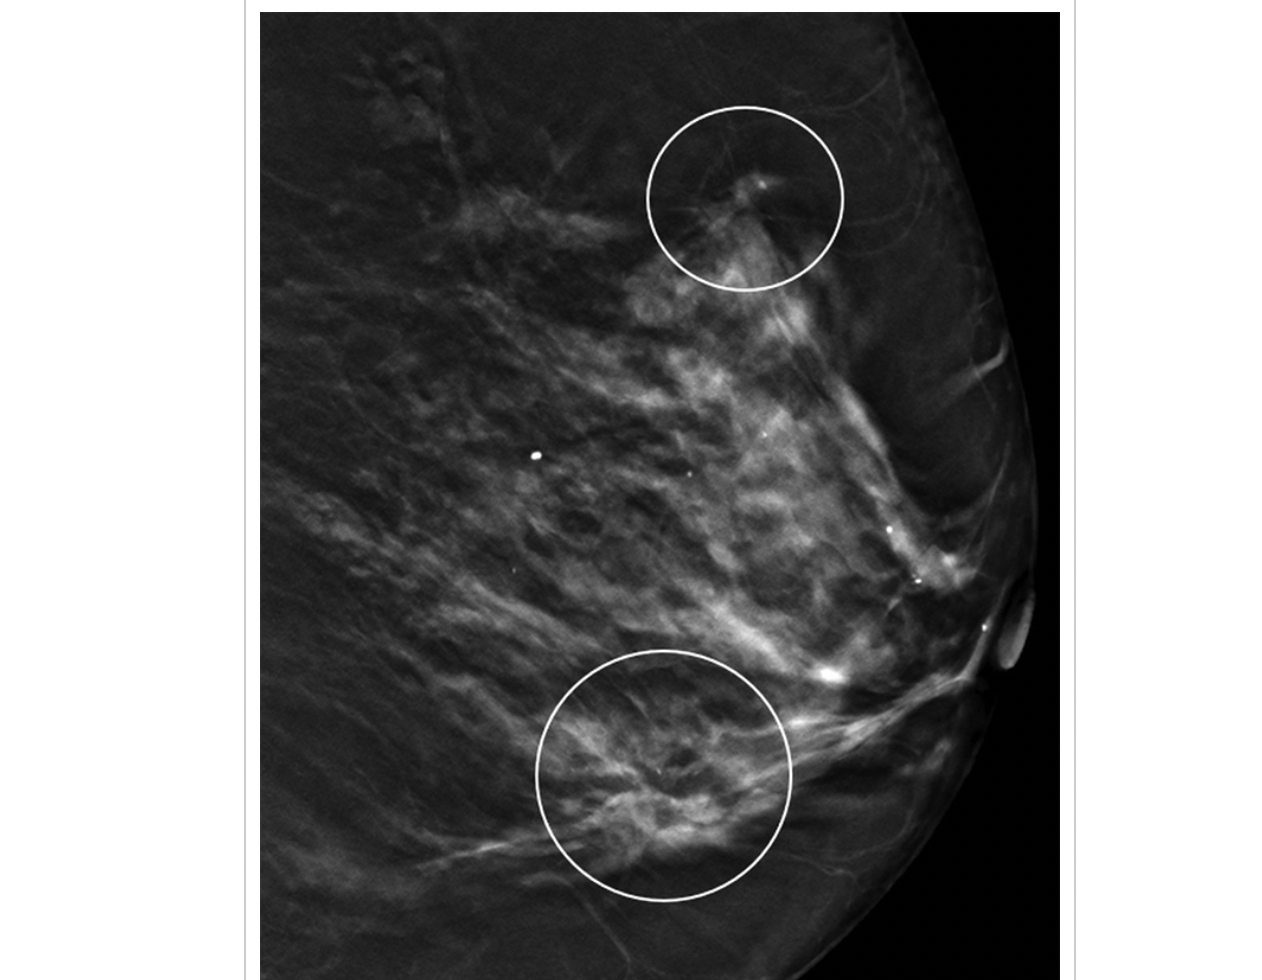 Showing marked breast asymmetry with a huge right breast mass and its